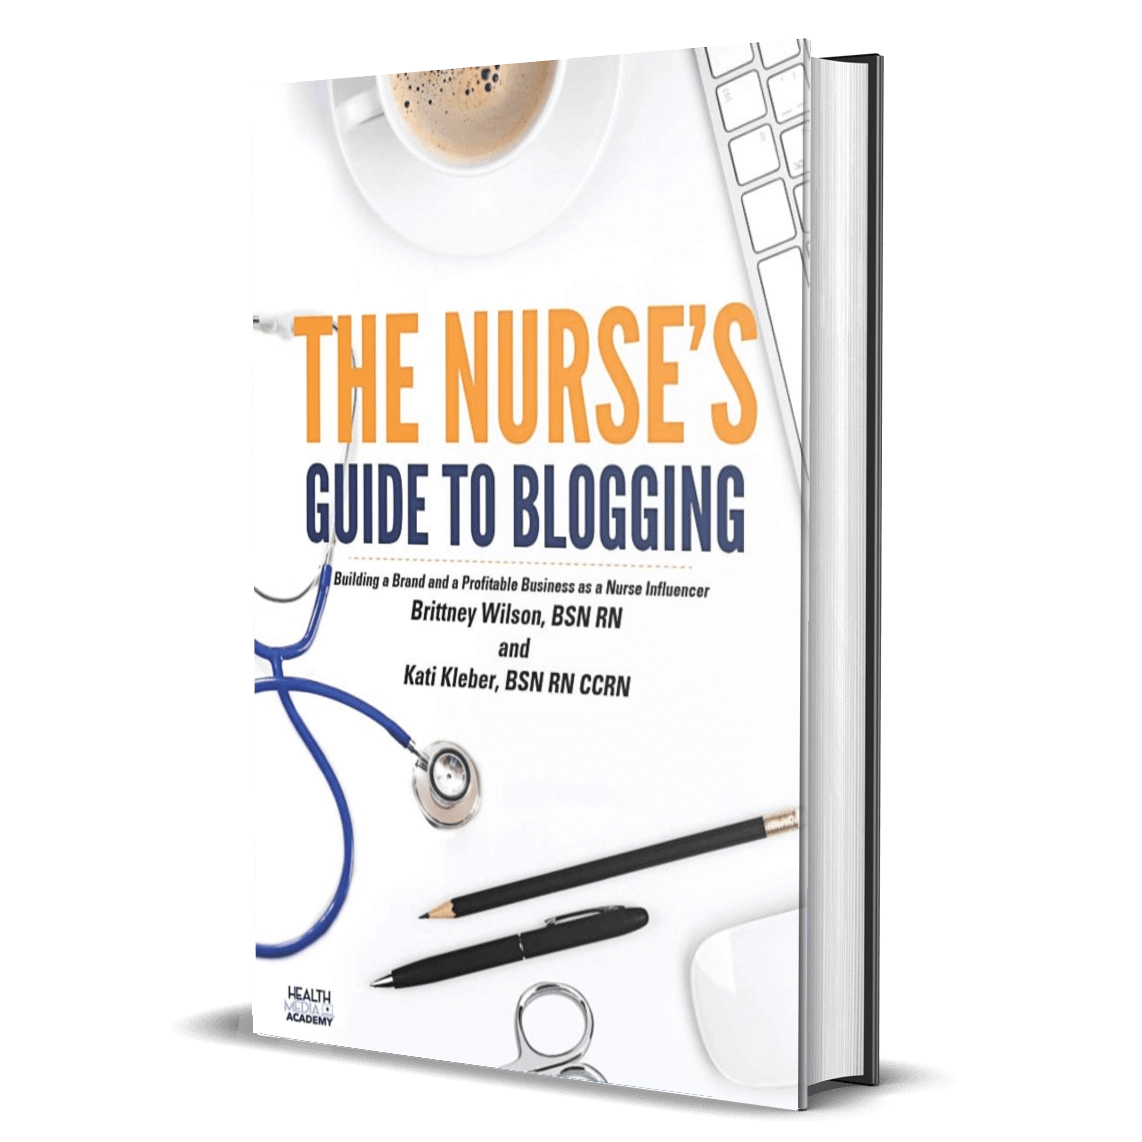 The Nurse's Guide to Blogging by Brittney Wilson and Kati Kleber is the go-to guide for nurses who want to start blogging.